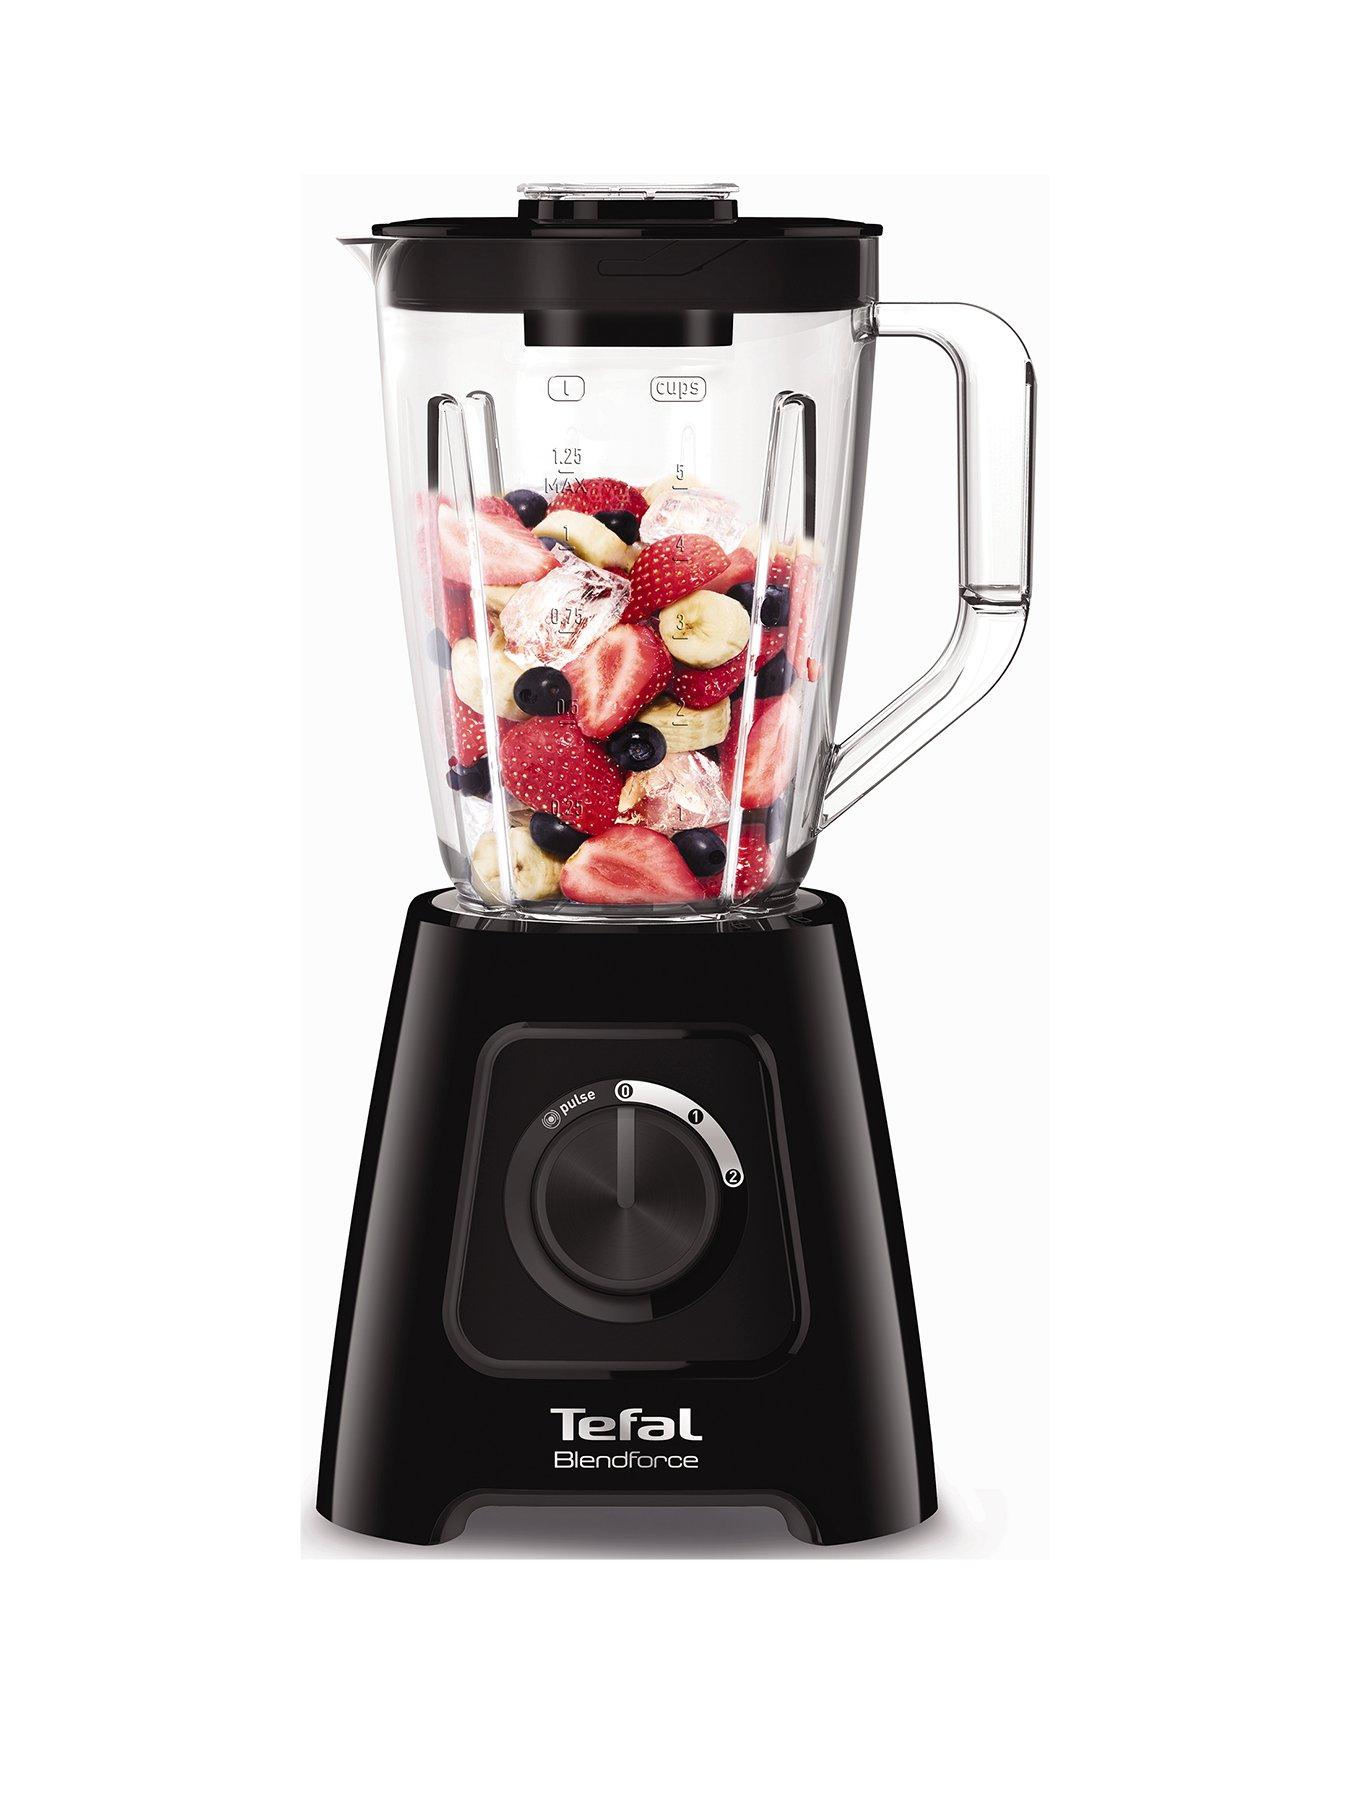 Dash Quest Countertop Blender 1.5L with Stainless Steel Blades for Coffee Drinks